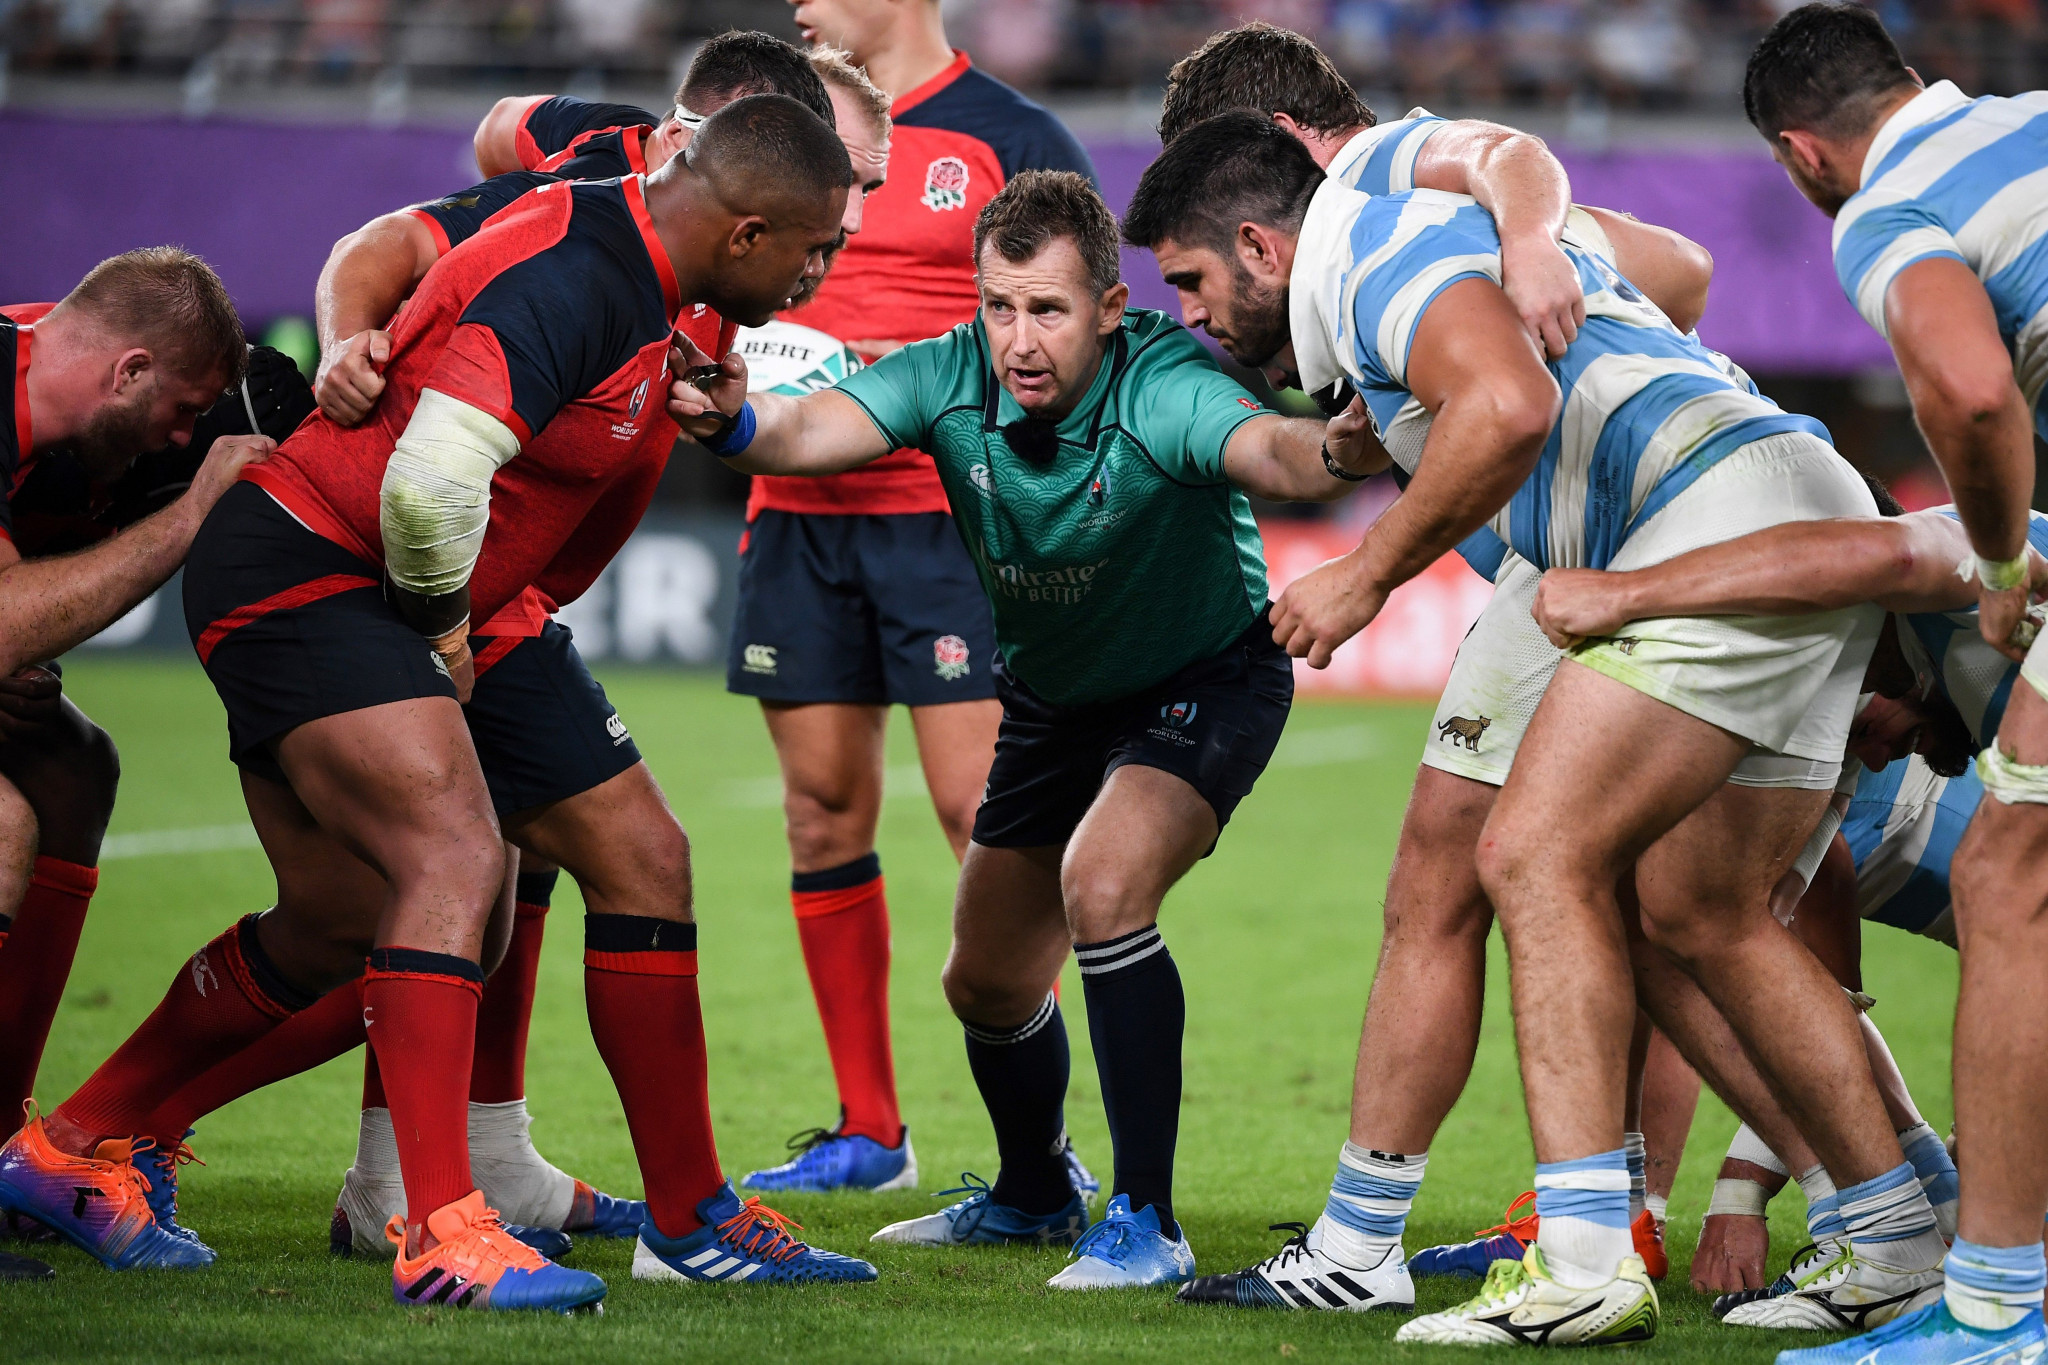 England and Japan remain unbeaten at RWC 2019